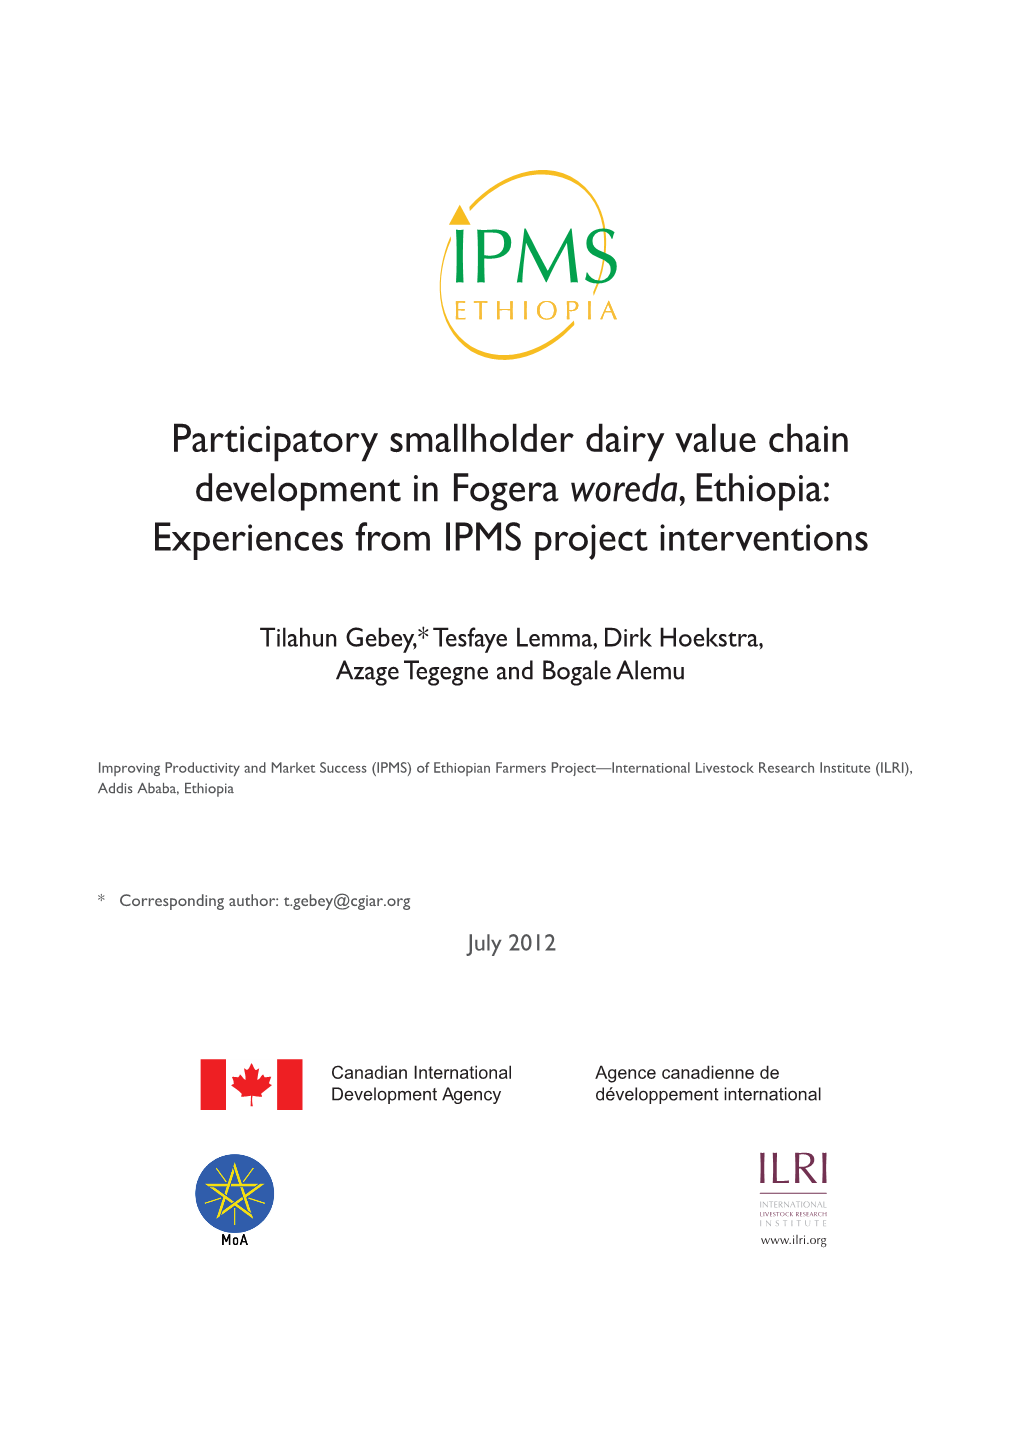 Participatory Smallholder Dairy Value Chain Development in Fogera Woreda, Ethiopia: Experiences from IPMS Project Interventions